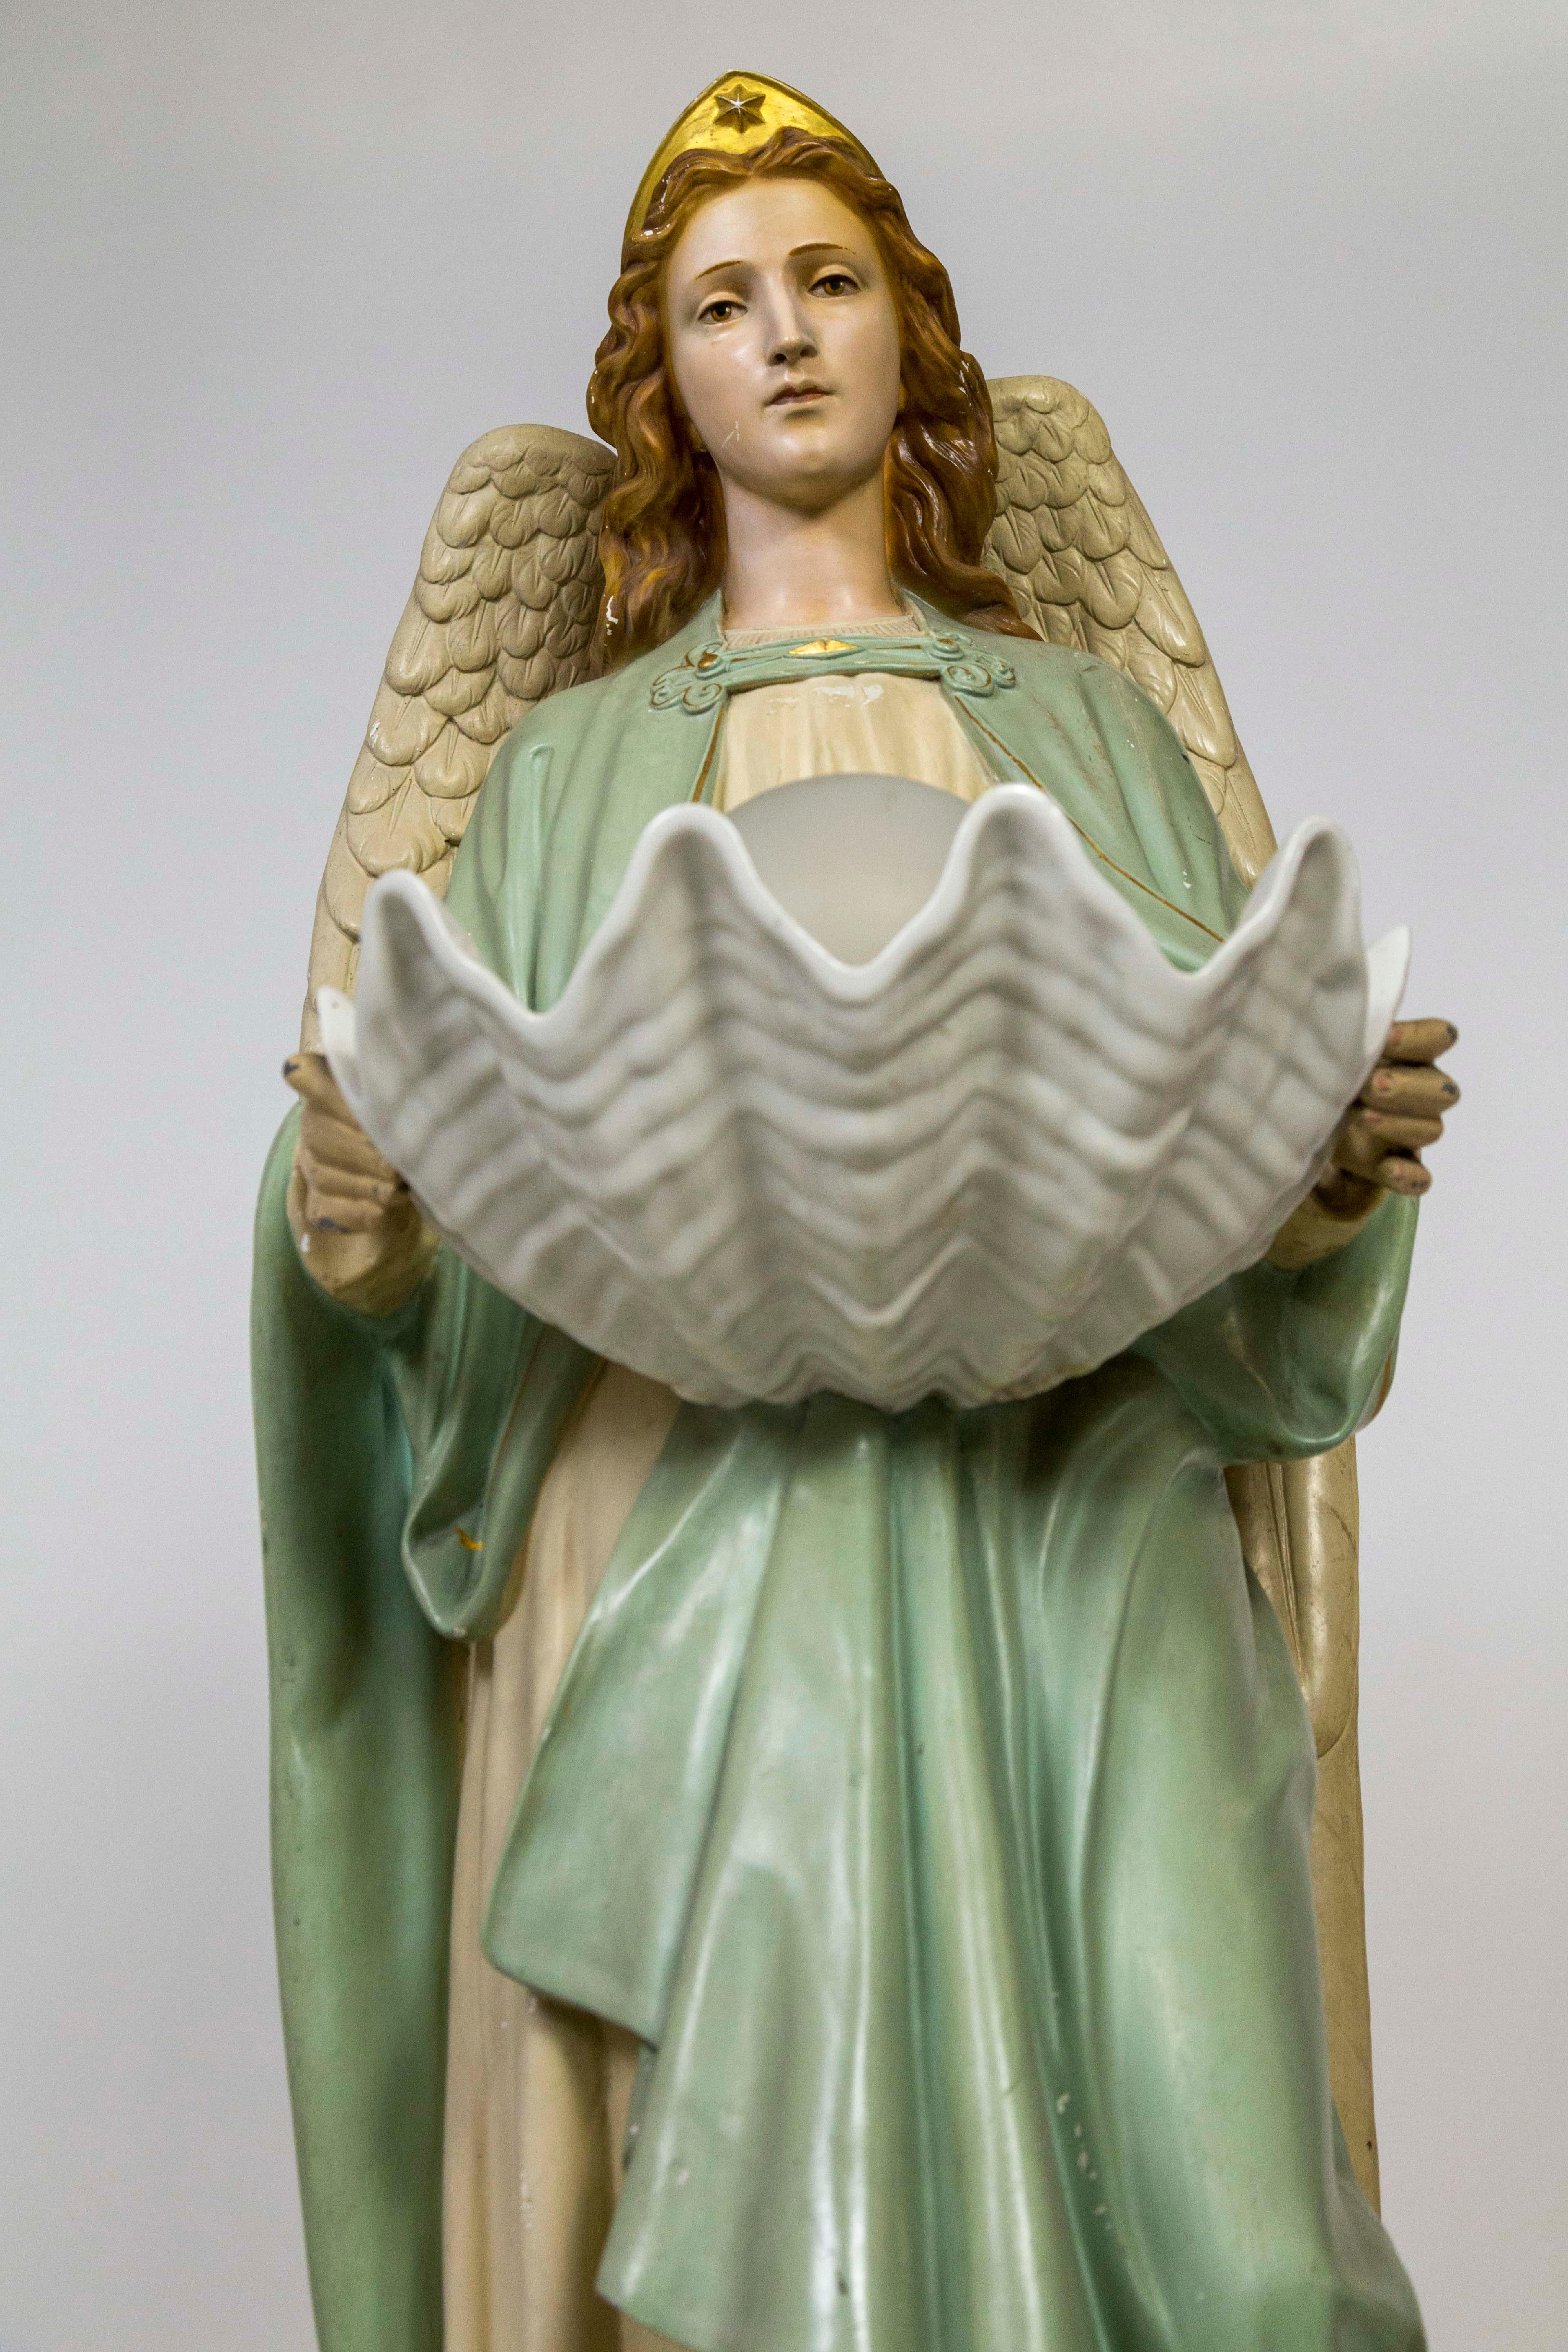 20th Century Life-size Angel Statue Holding Porcelain Clam Shell Bowl with Light